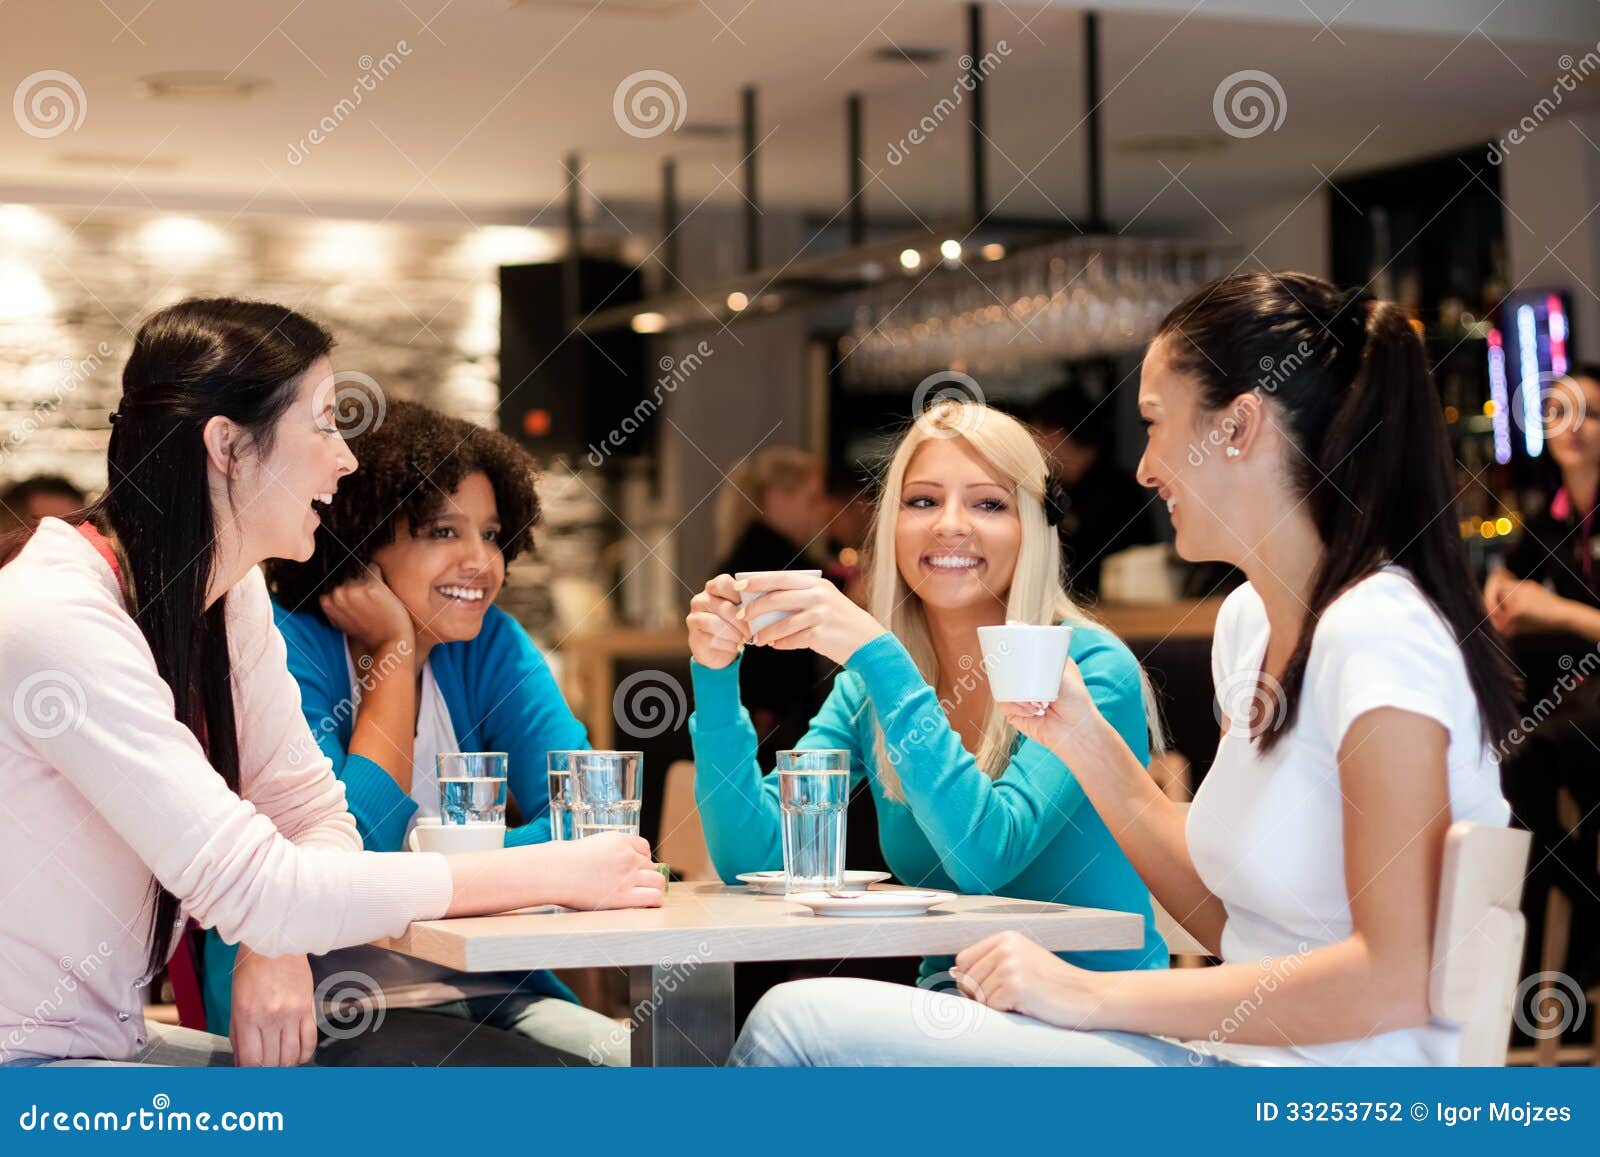 group of young women on coffee break